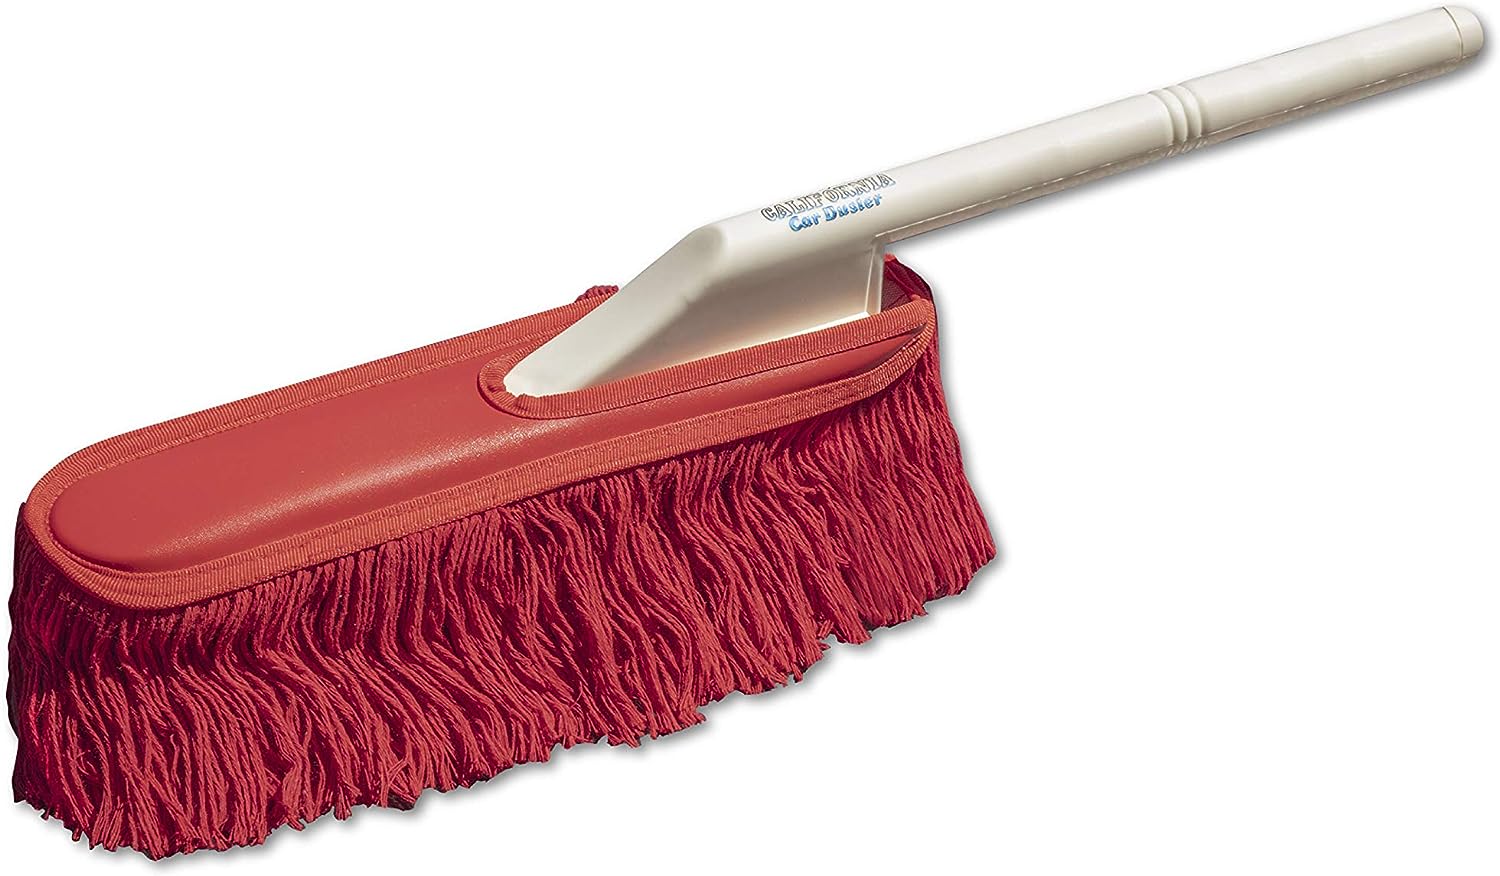 The Original California Car Duster Standard with Plastic Handle, Red 25 Inch $15.88 Shipping free w/Prime or on 35+ - Amazon